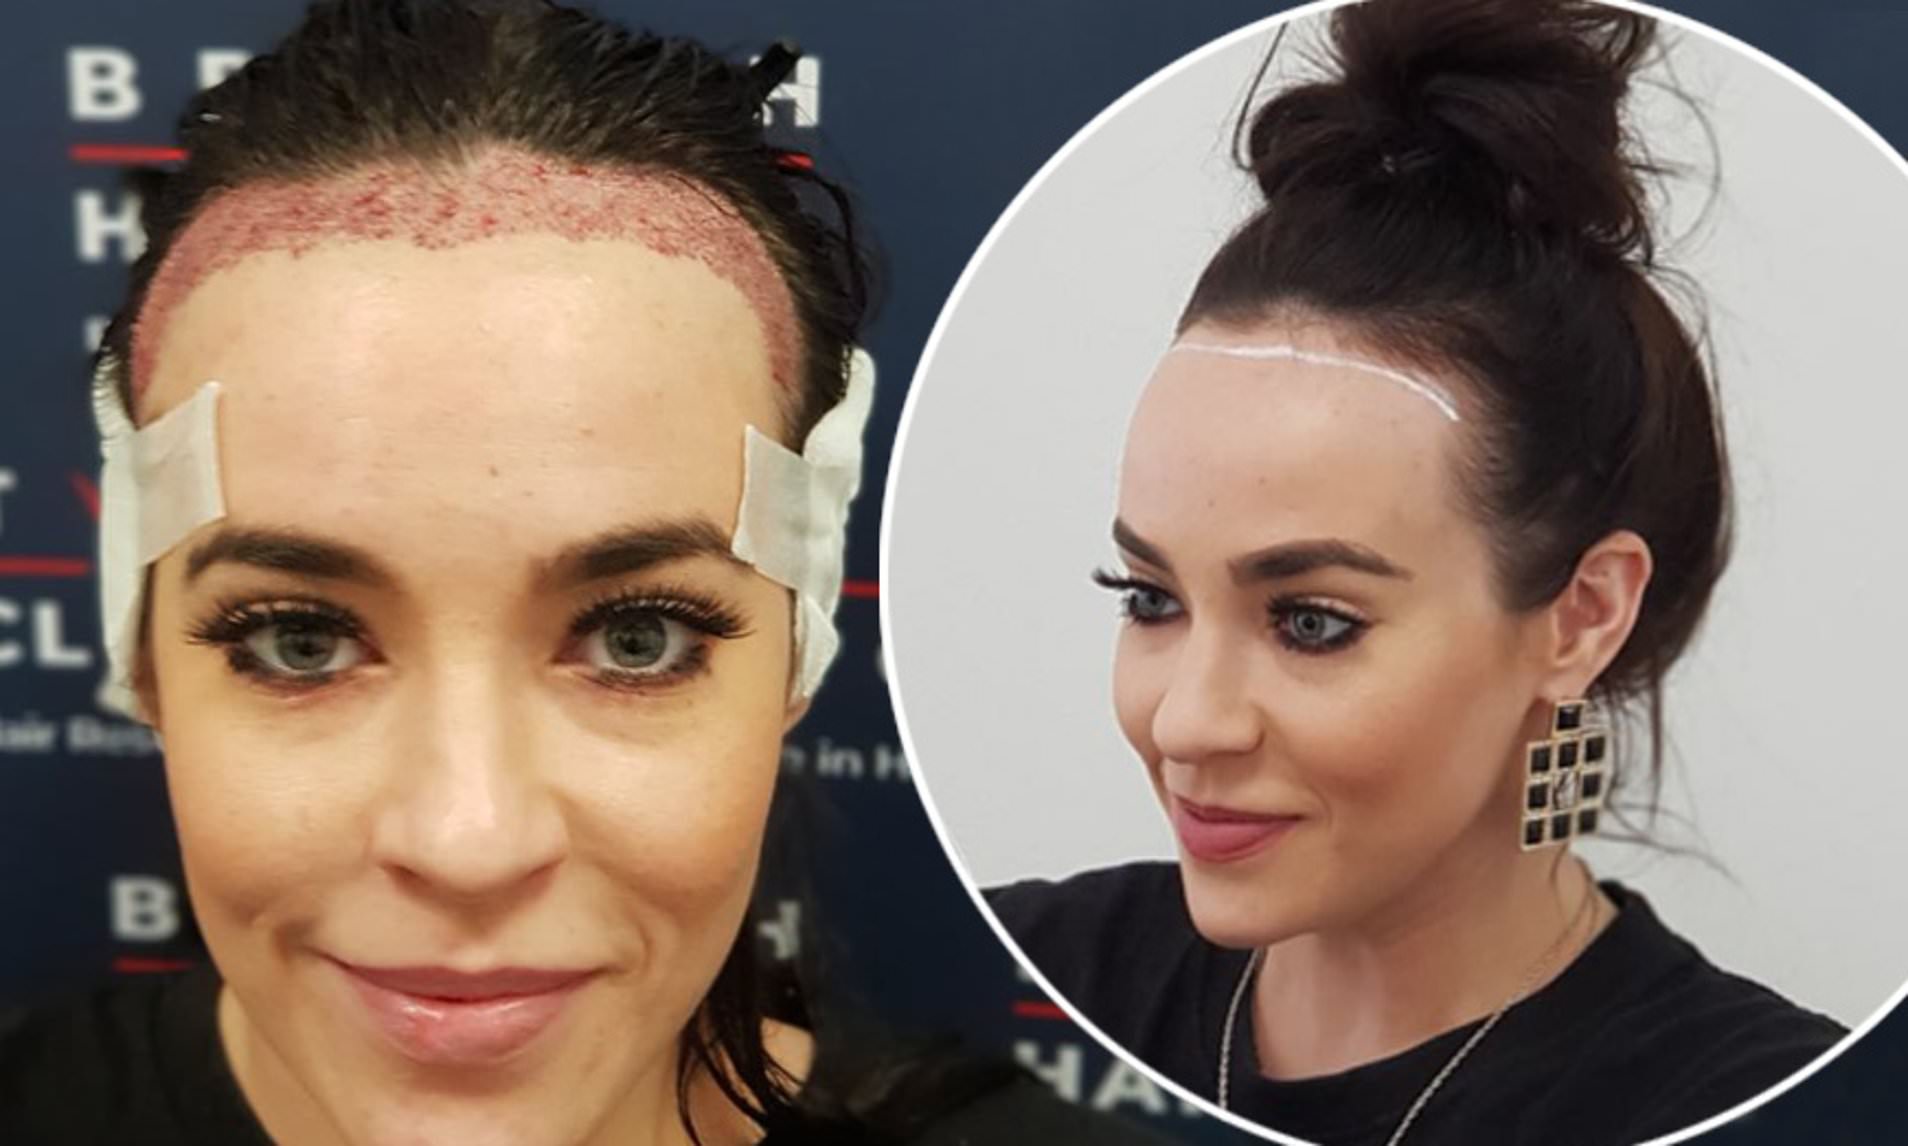 foreheadhair transplant before after